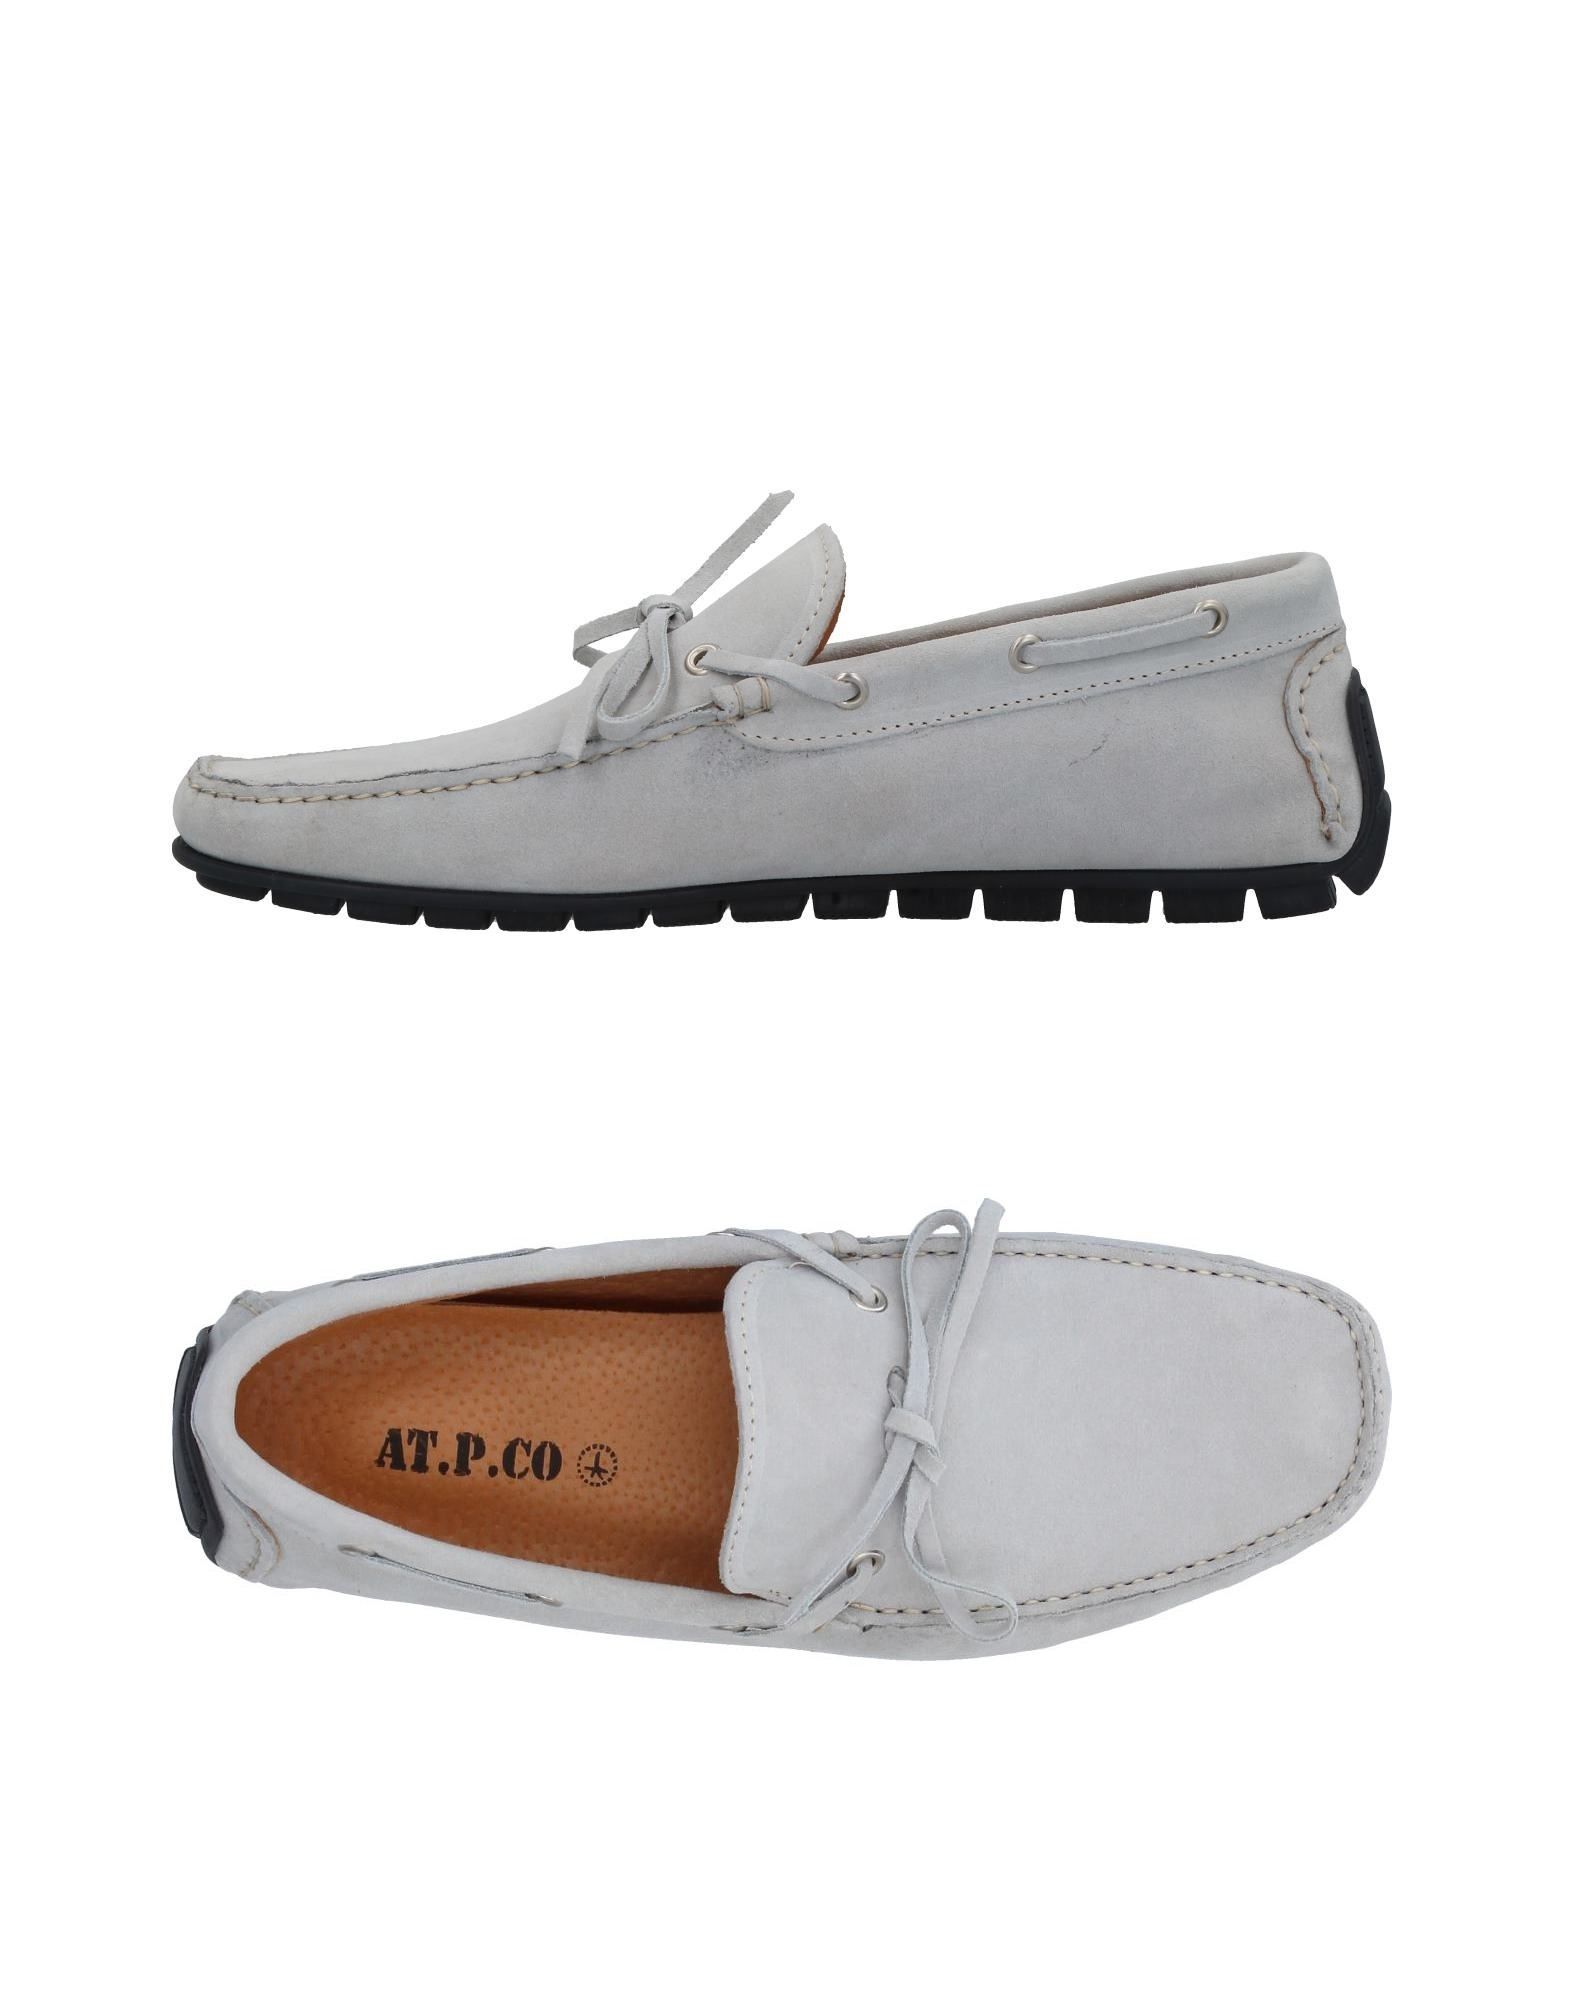 AT.P.CO Loafers